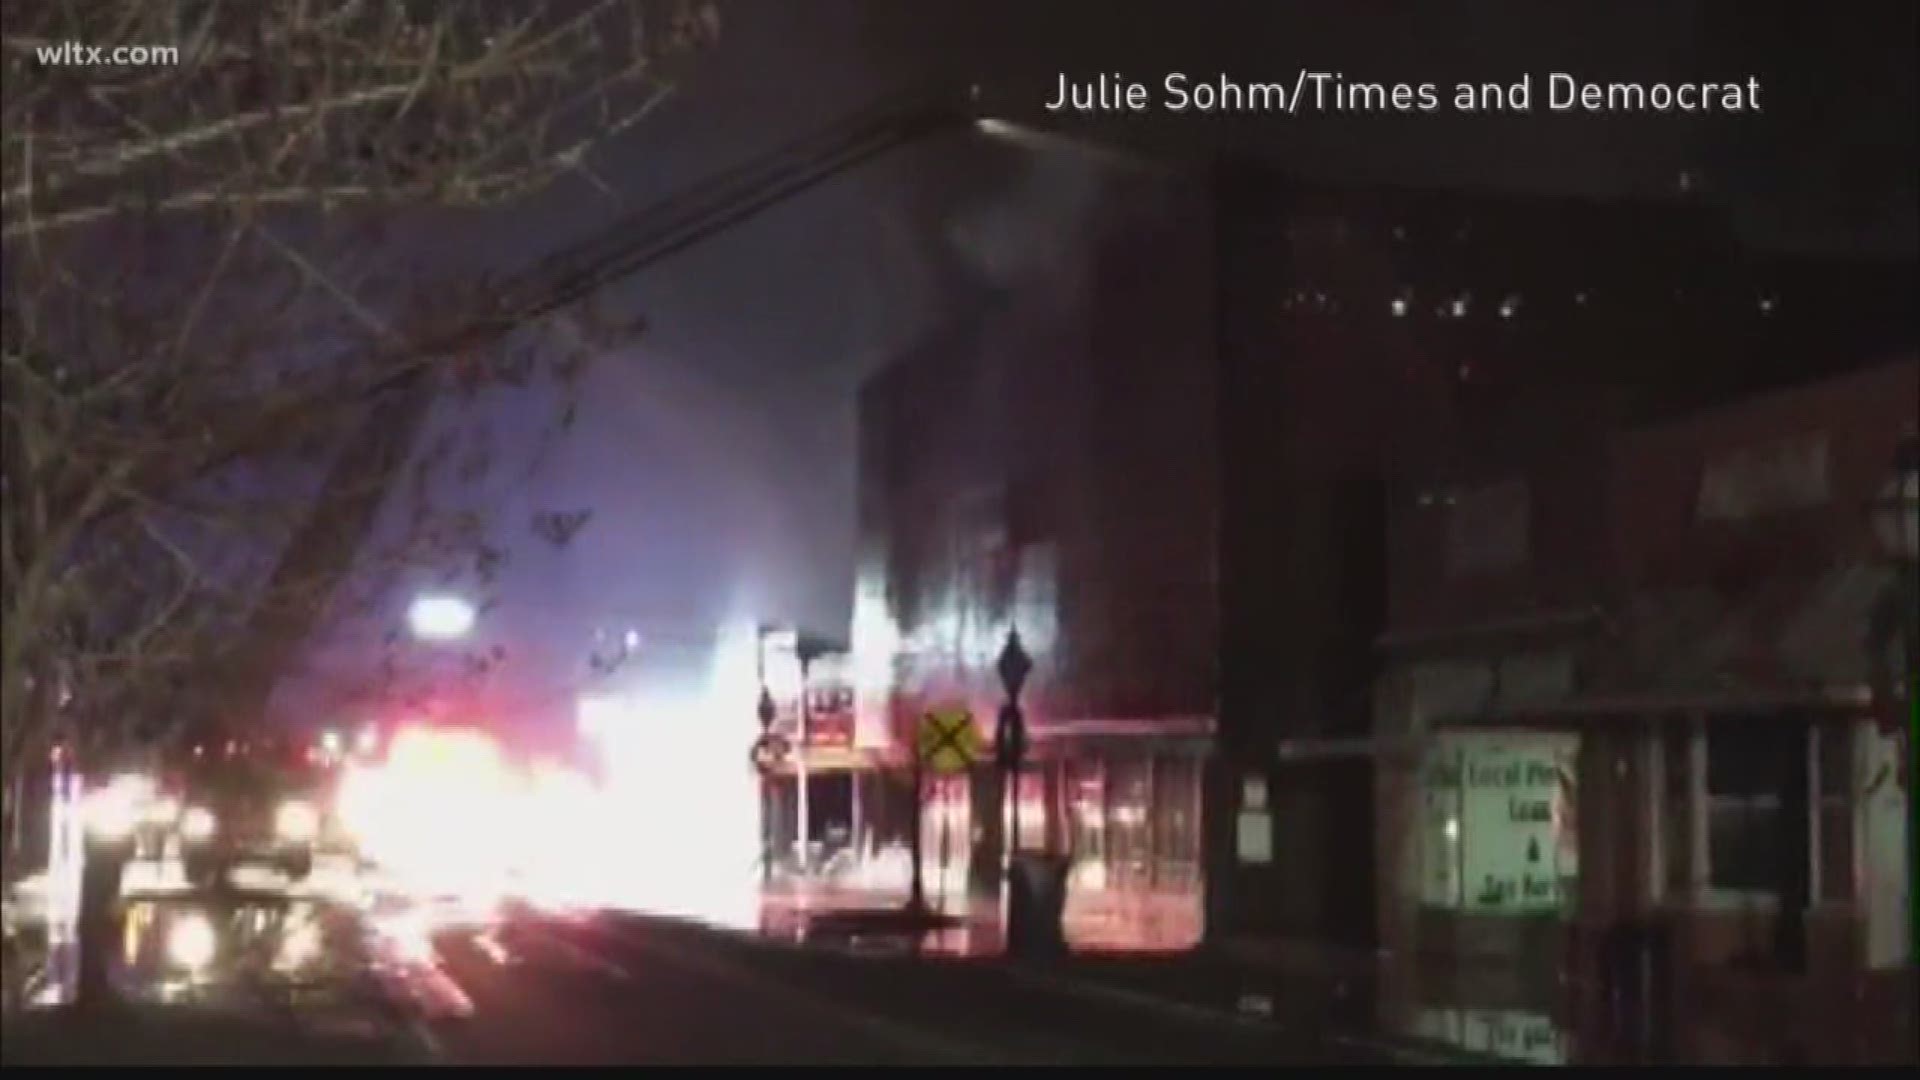 The Super 10 department store, Goldstein's and Touch of Class were destroyed in the fire.